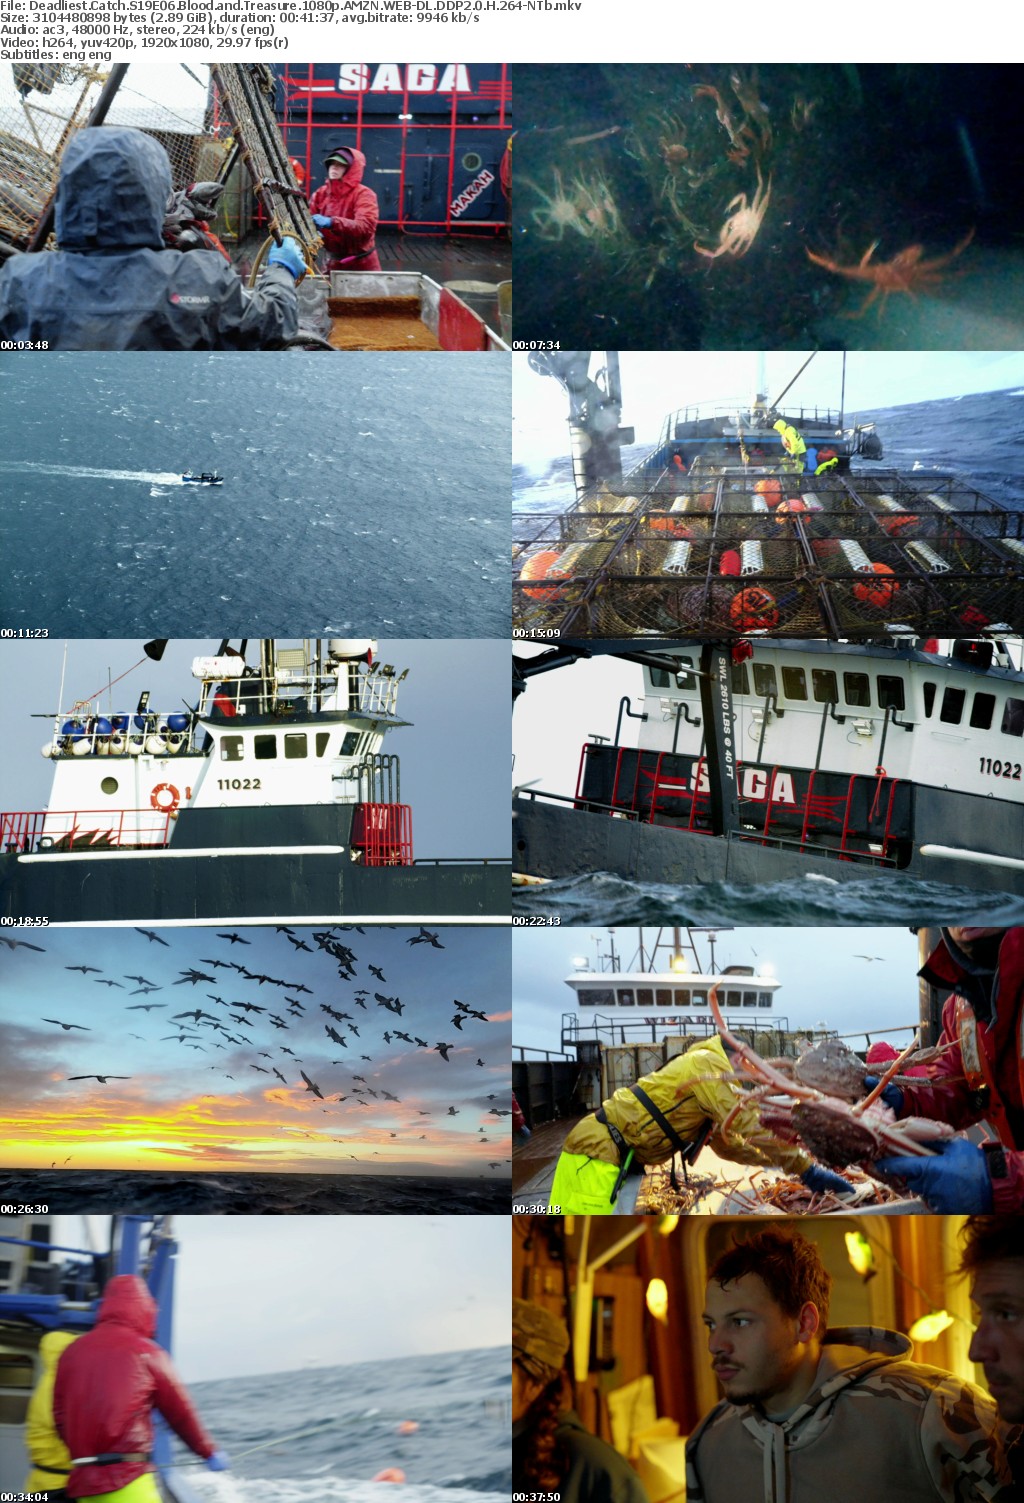 Deadliest Catch S19E06 Blood and Treasure 1080p AMZN WEB-DL DDP2 0 H 264-NTb